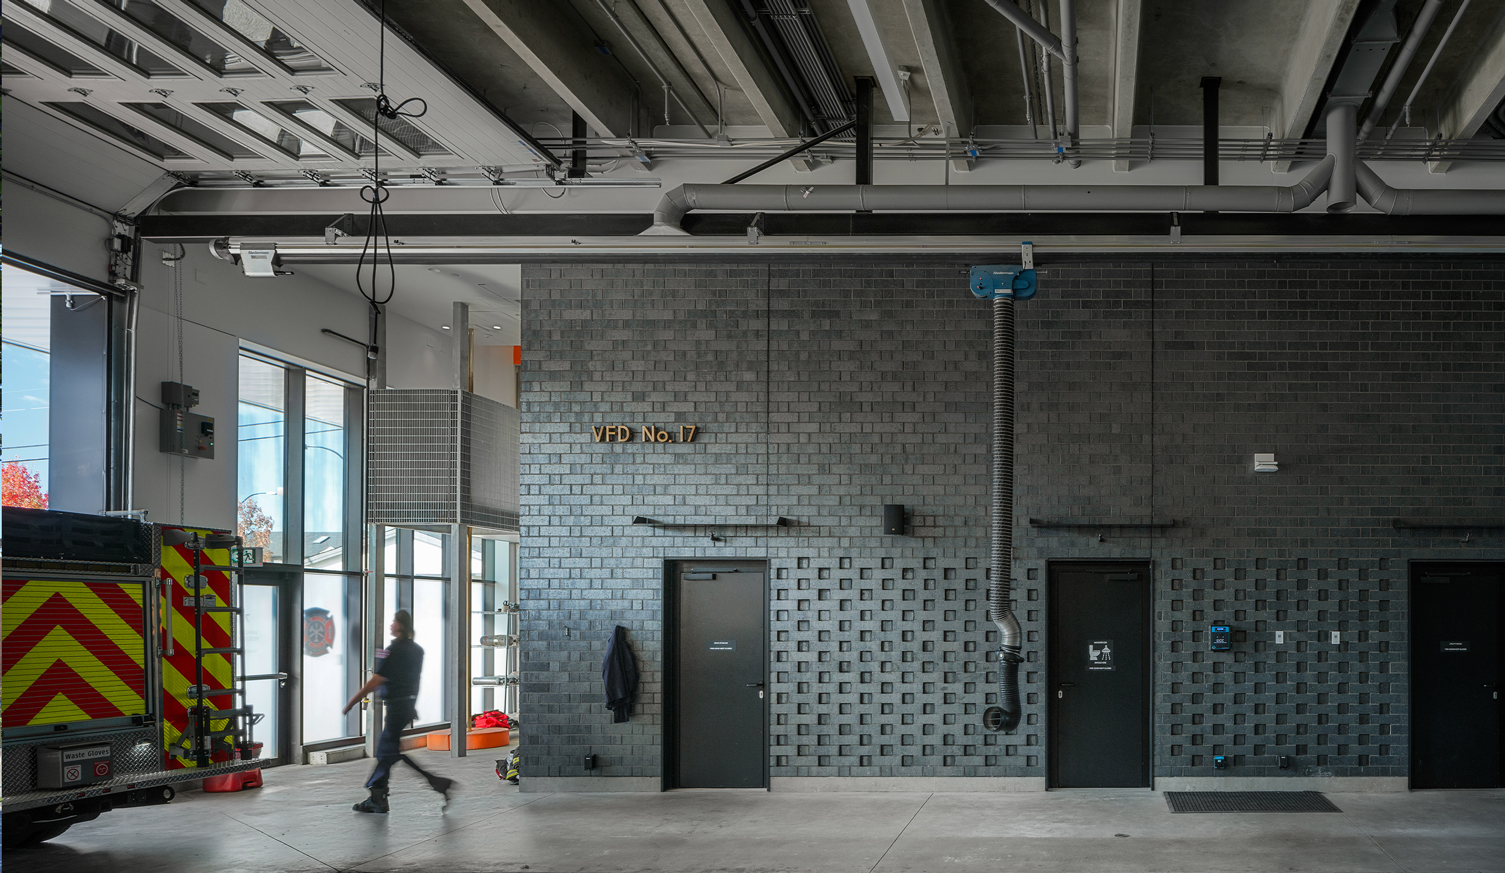 Interior shot of the apparatus bay at Vancouver Fire Hall No. 17, featuring textured brick work.